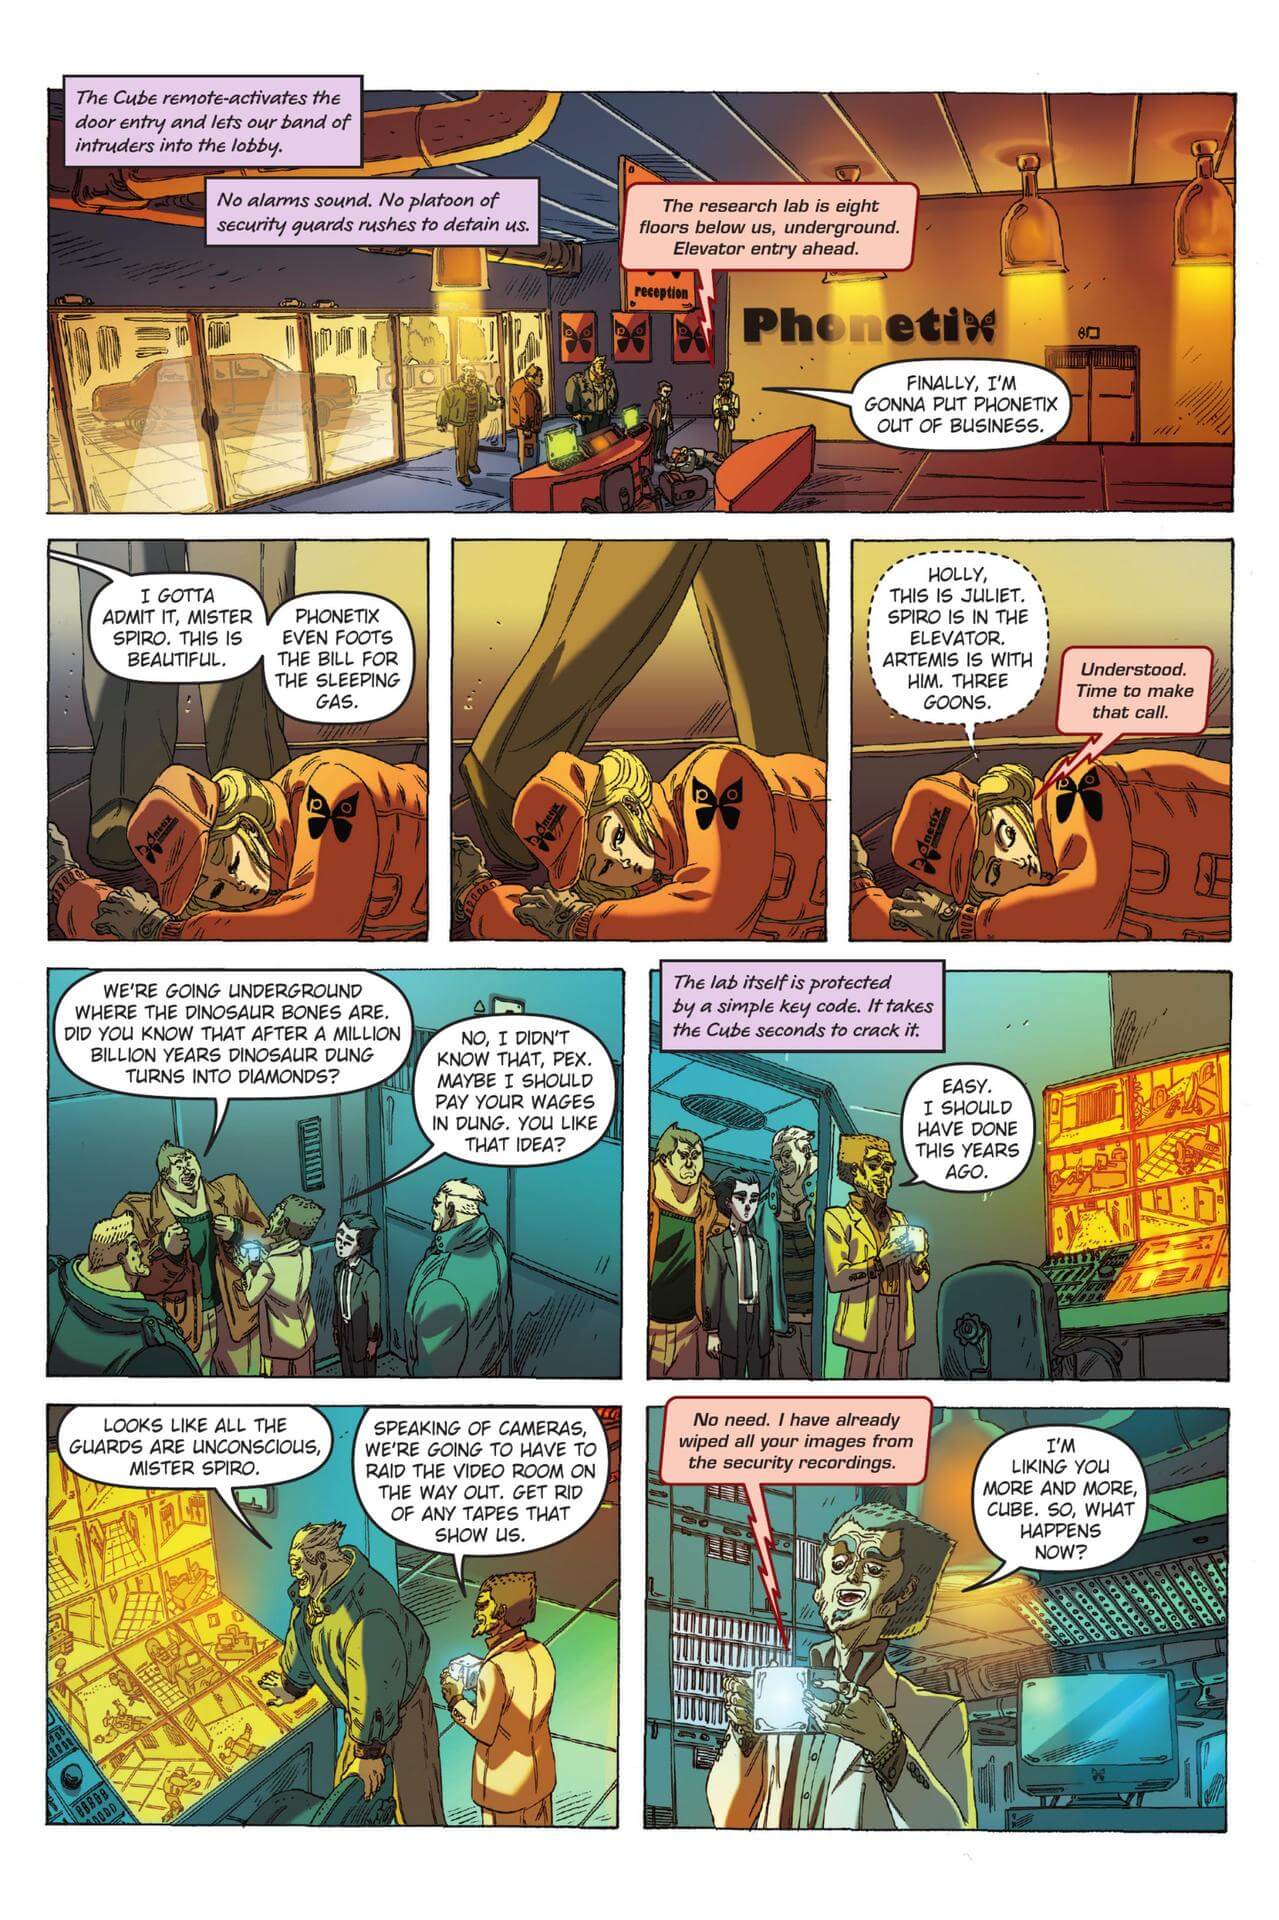 page 93 of artemis fowl eternity code graphic novel